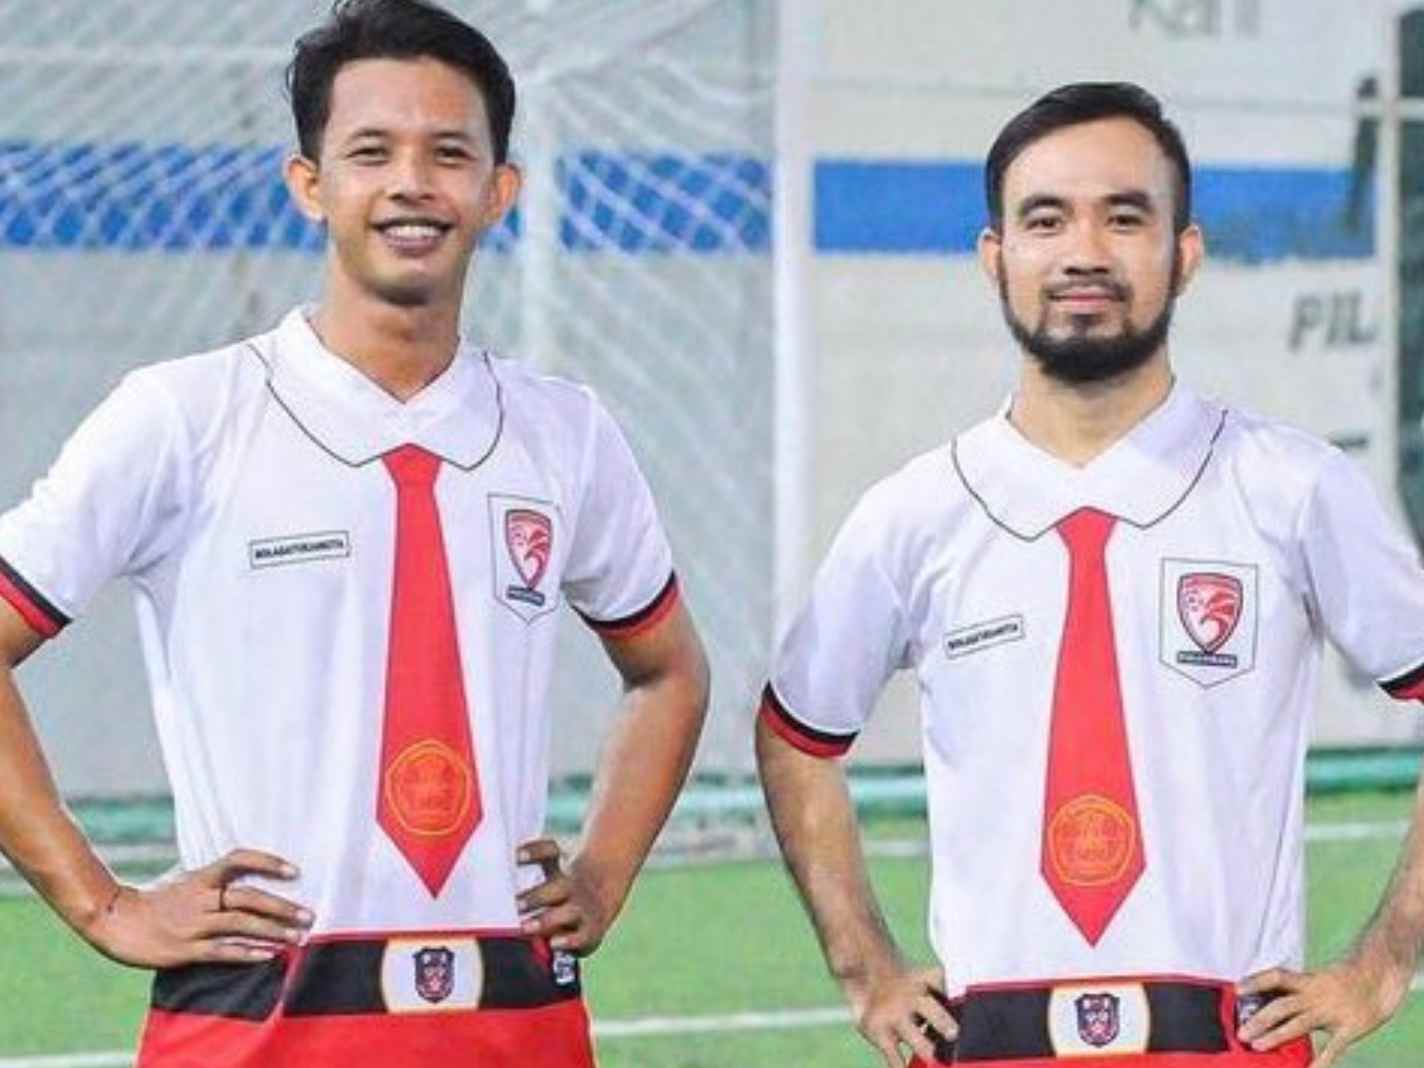 Football Kit Goes Viral For Looking Exactly Like A School Uniform